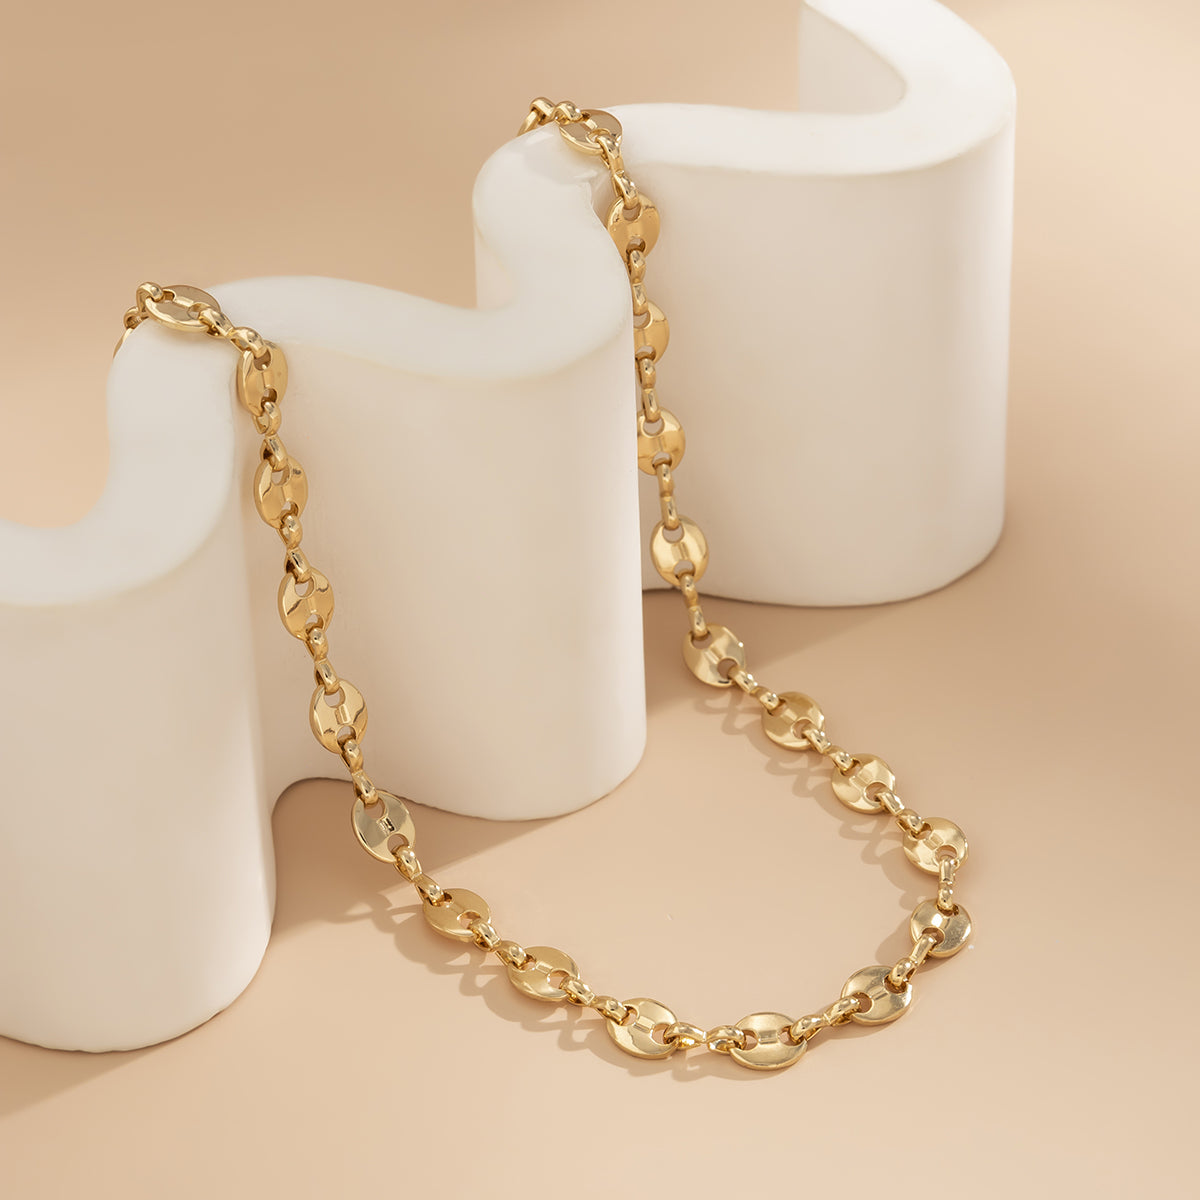 18K Gold-Plated Mariner Chain Necklace